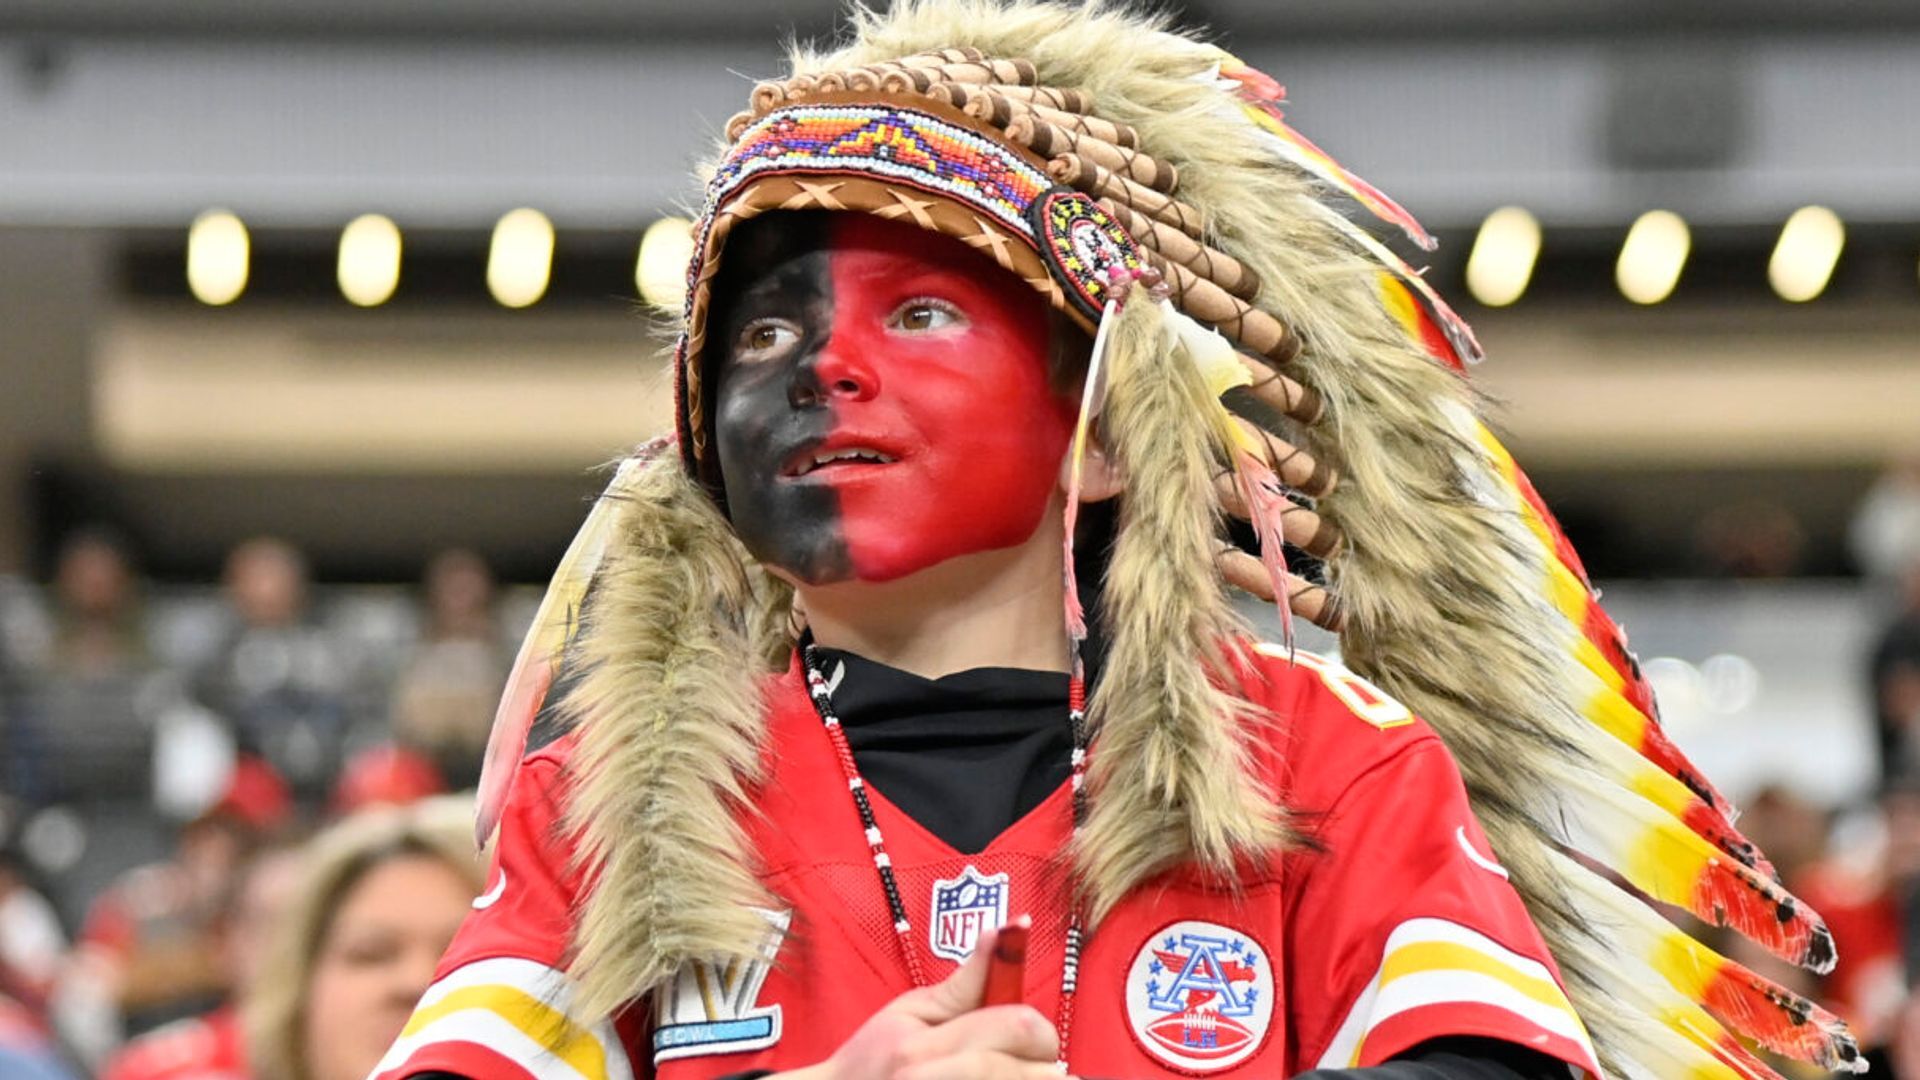 The boy's family is suing Deadspin for defamation following an article accusing him of wearing blackface at a Chiefs game.